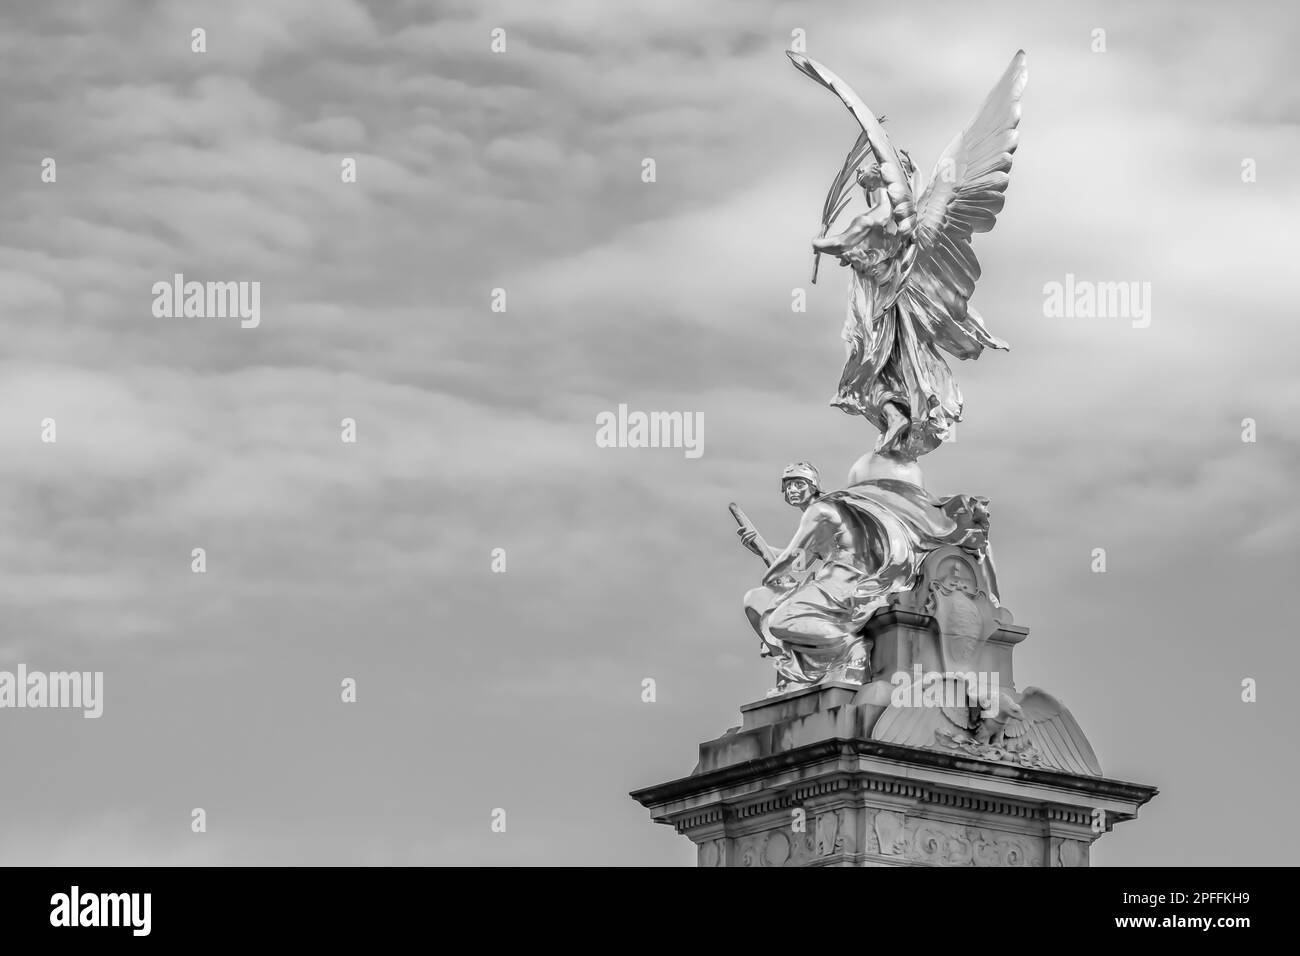 London, United Kingdom - May 23, 2018 : Close up view of the Queen Victoria memorial monument in London Uk in black and white Stock Photo